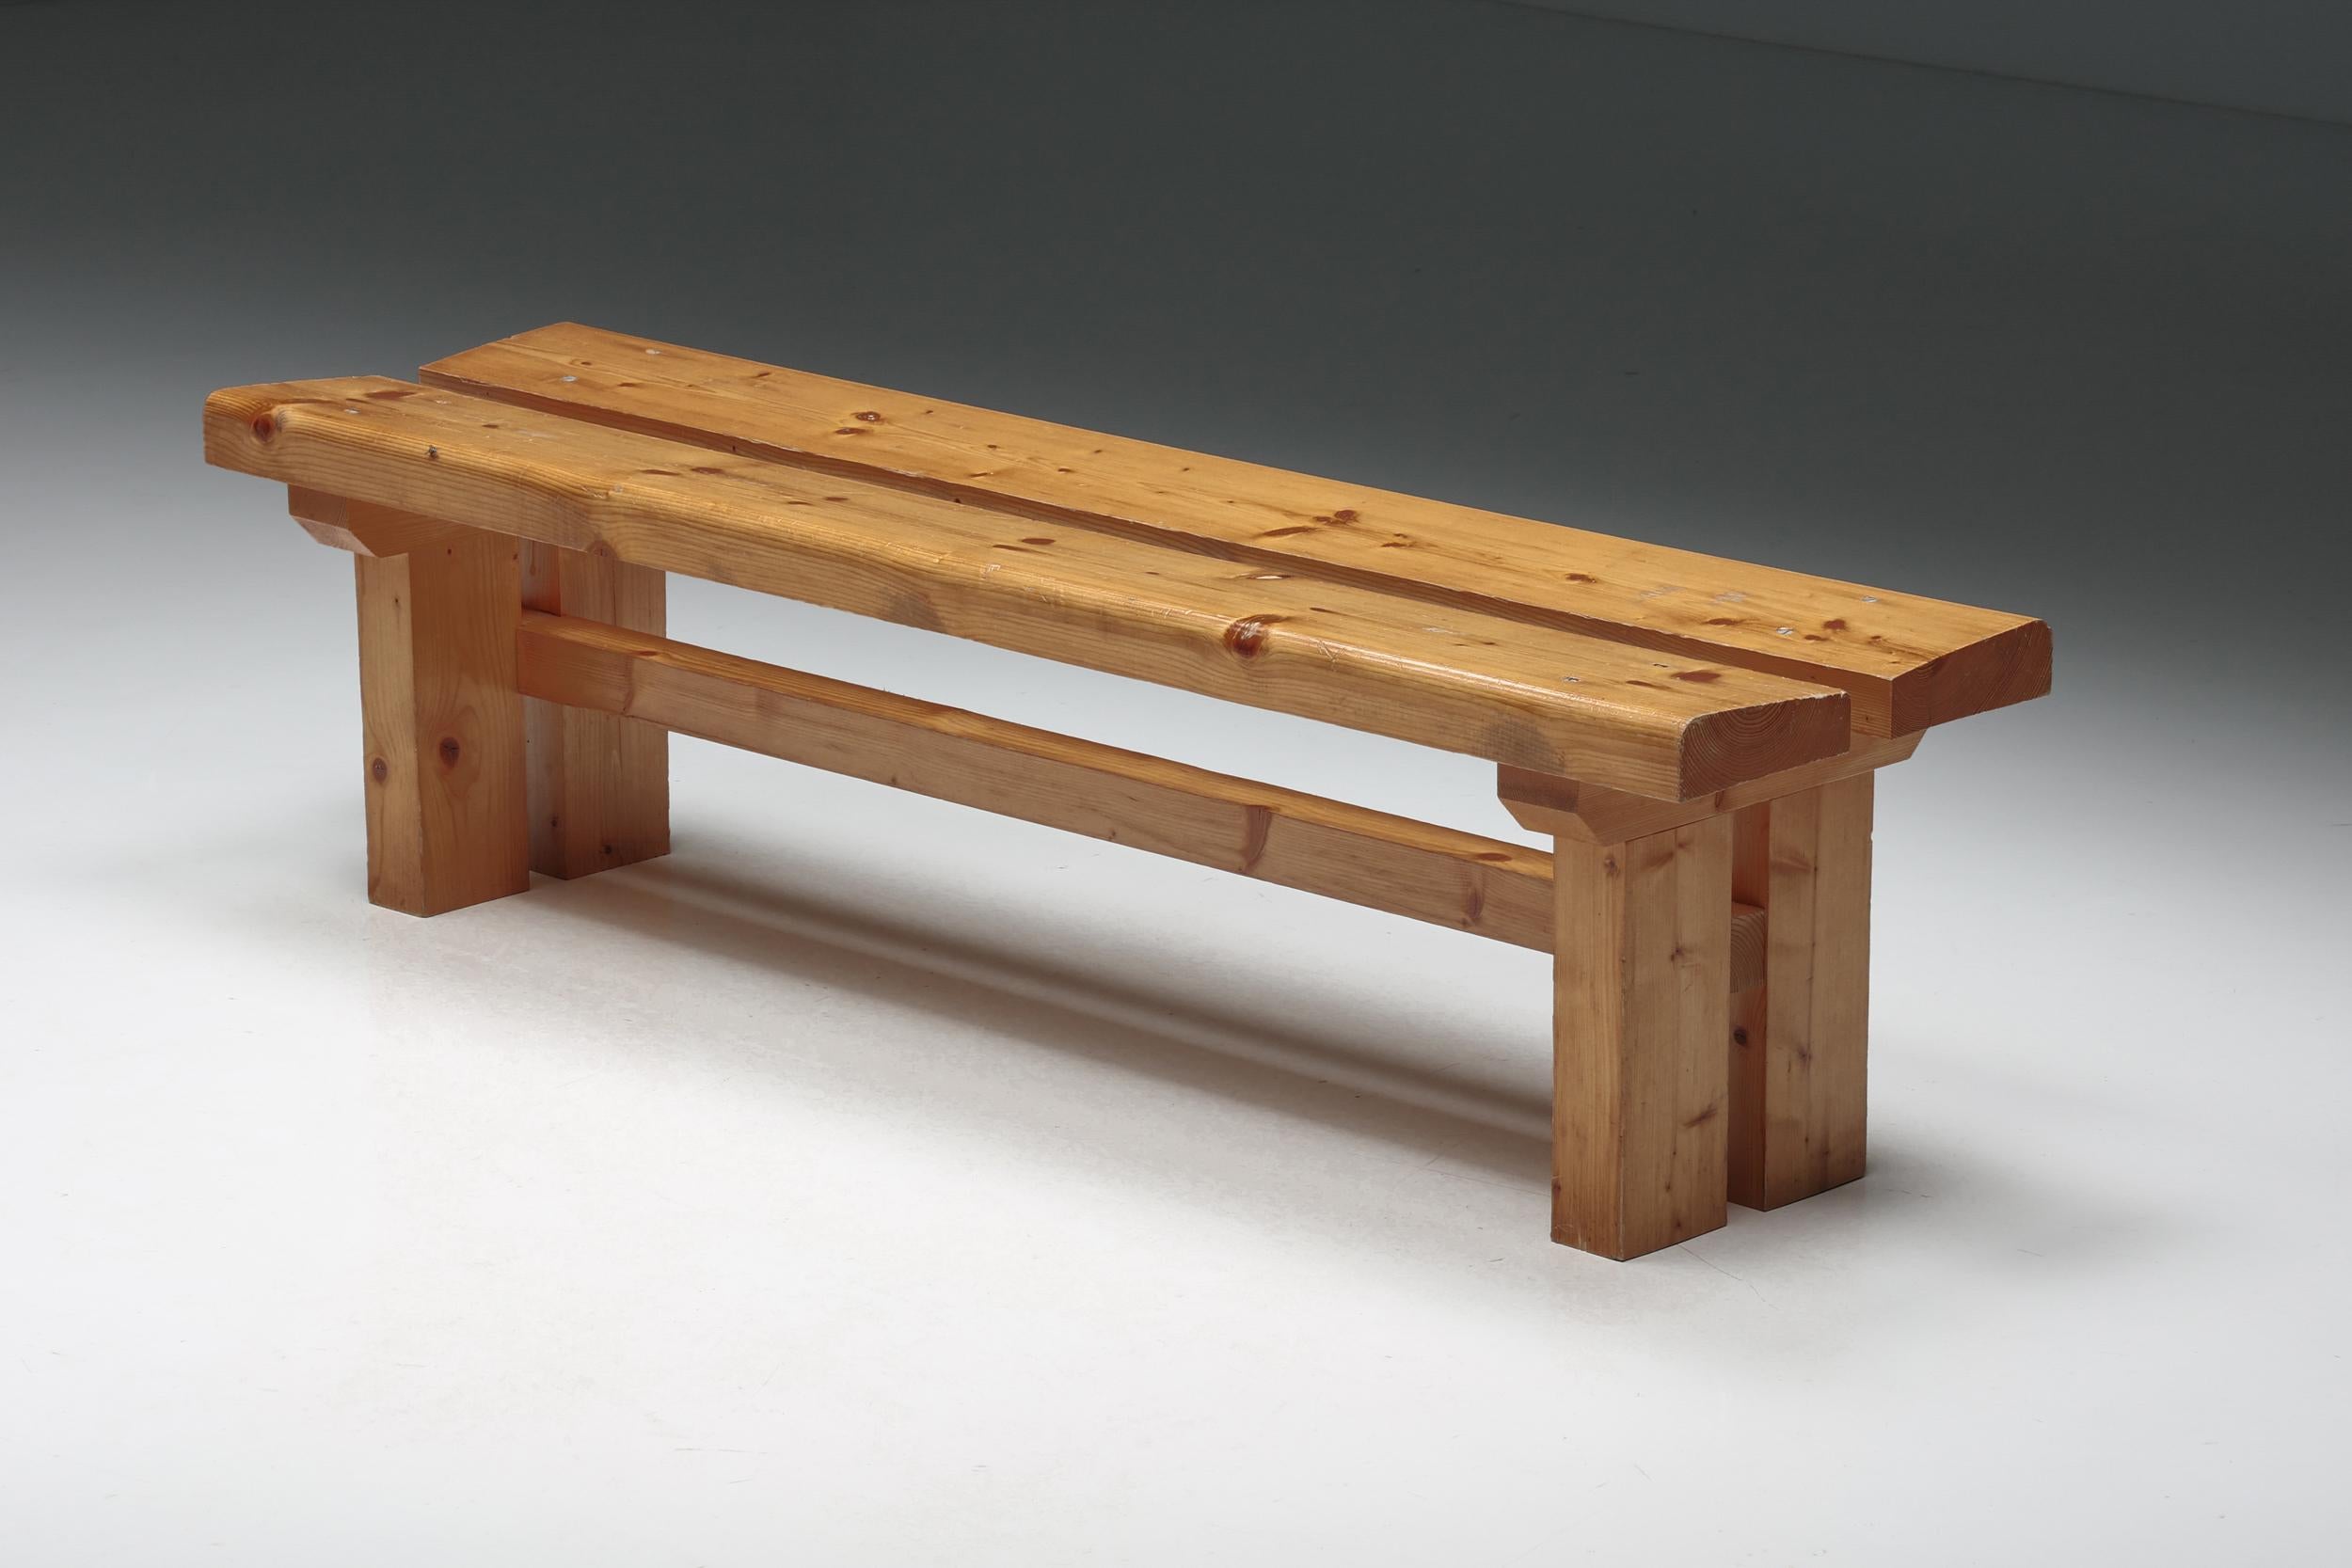 Les Arcs; bench; Backrest; Charlotte Perriand; Pine; French Modernism; 1970s;

Pine bench designed by the French designer Charlotte Perriand in the 1970s. It is composed of four feet connected by a spacer and two thick slats forming the seat, all